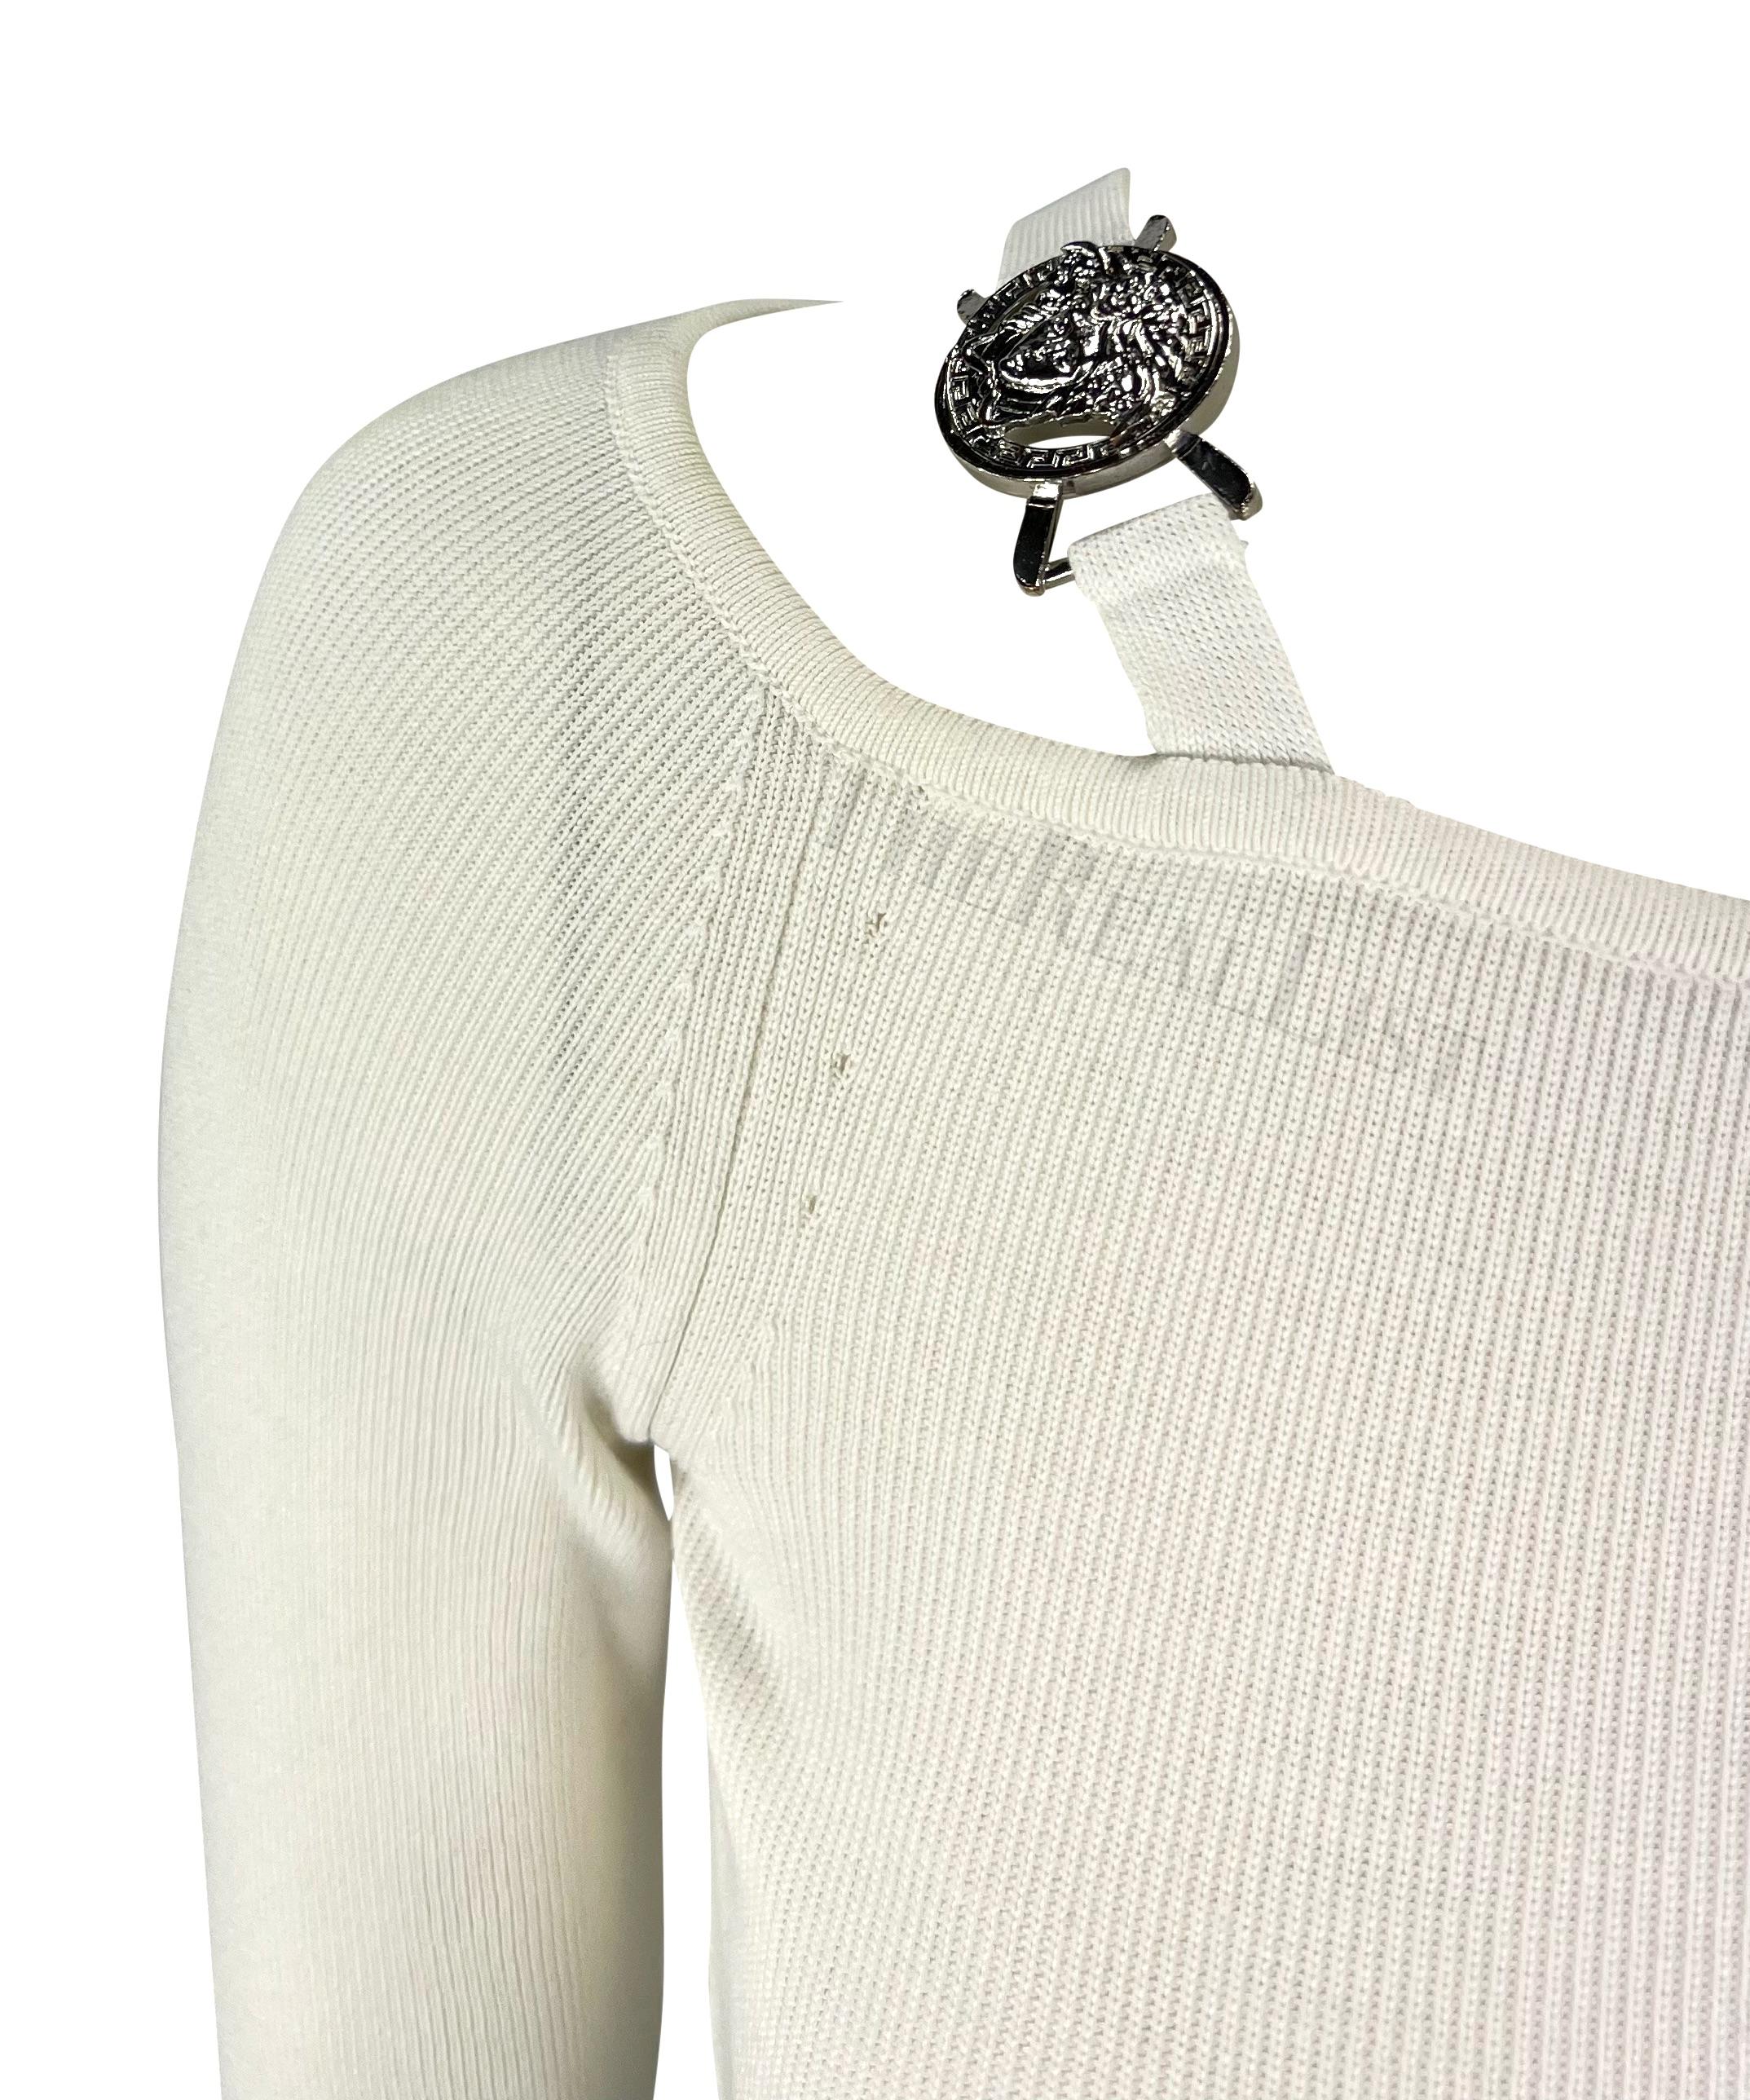 Presenting a chic white Versace long-sleeve knit top, designed by Donatella Versace. From the Spring/Summer 2005, this form-fitting ribbed knit top features a wide neckline that is accented with silver-tone Versace Medusa reliefs on either side of